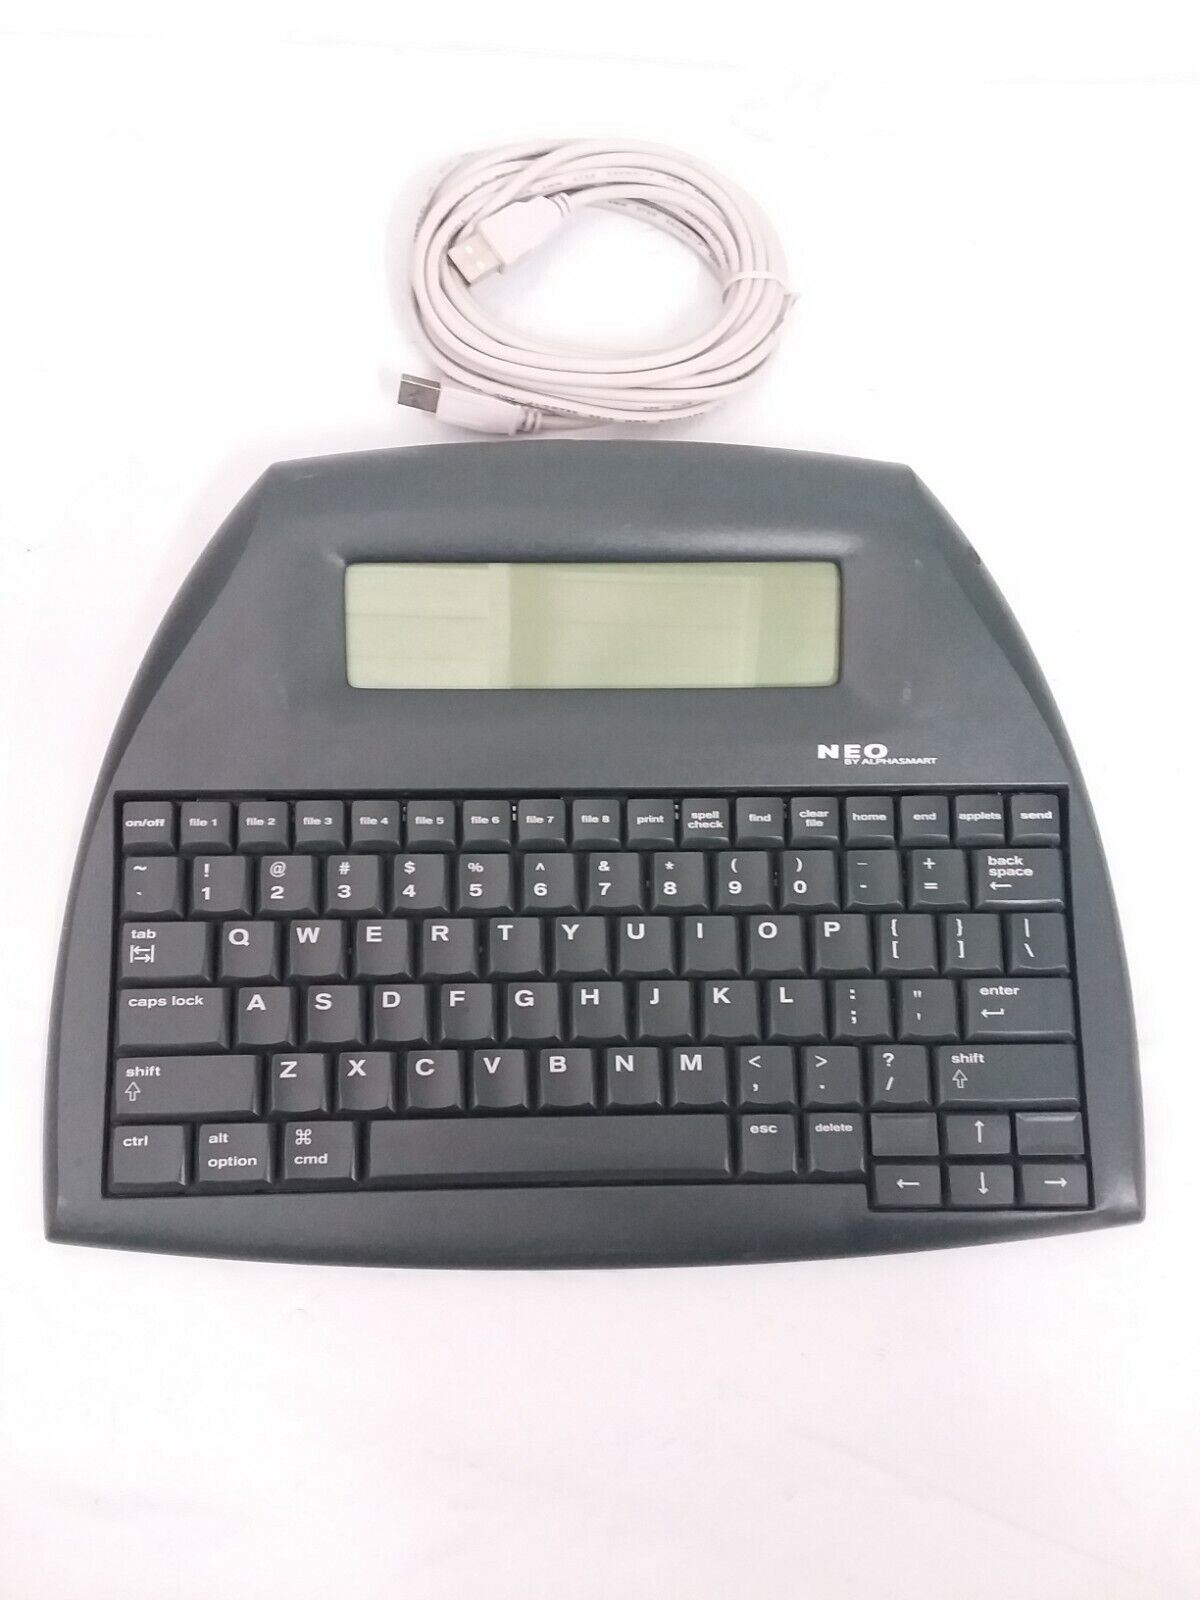 NEO Portable Word Processor (w/USB Cord, Batteries Not Included) Alphasmart USED